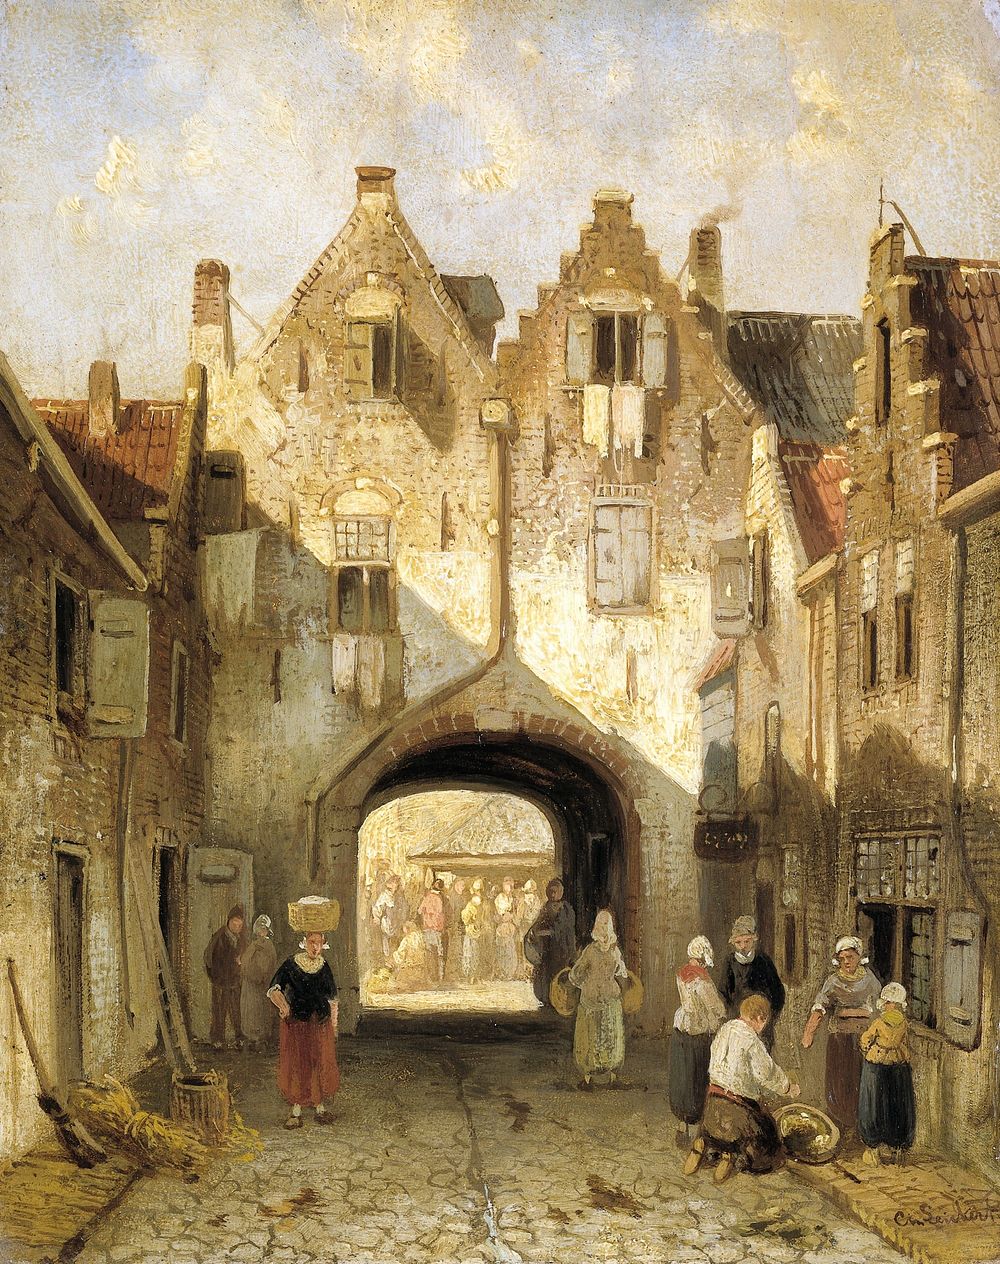 The Old Gate (c. 1850 - c. 1880) by Charles Leickert